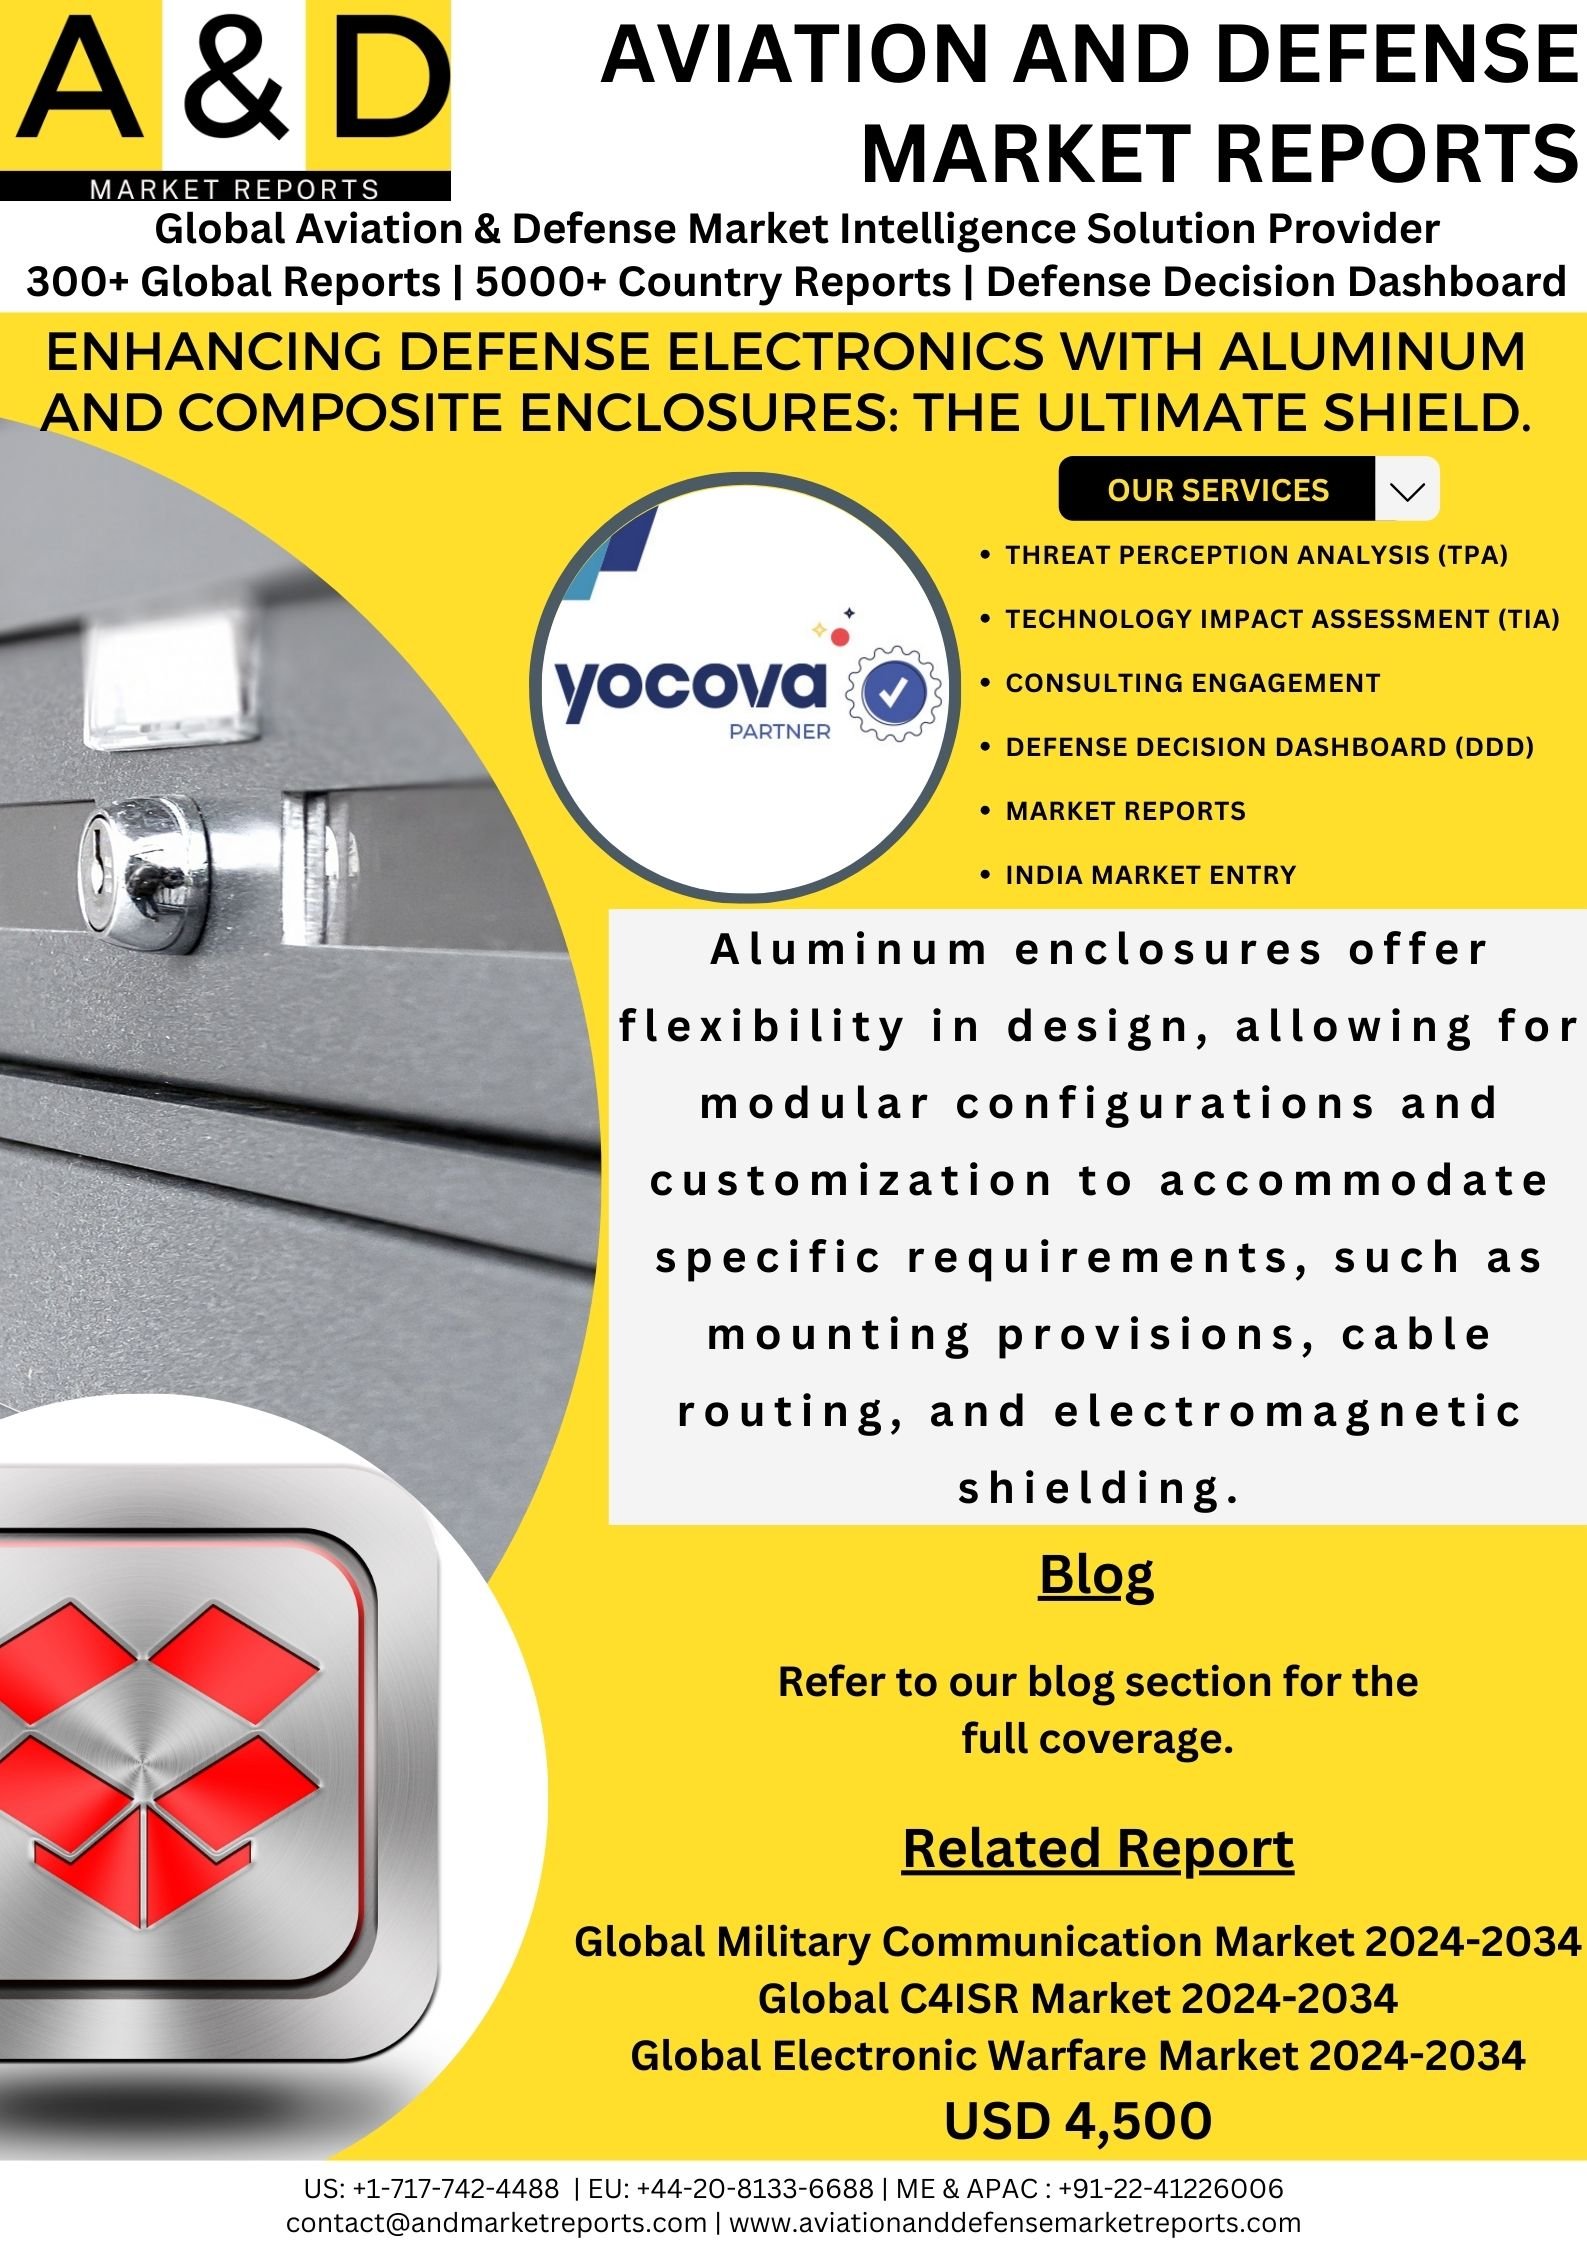 Enhancing Defense Electronics With Aluminum And Composite Enclosures: The Ultimate Shield